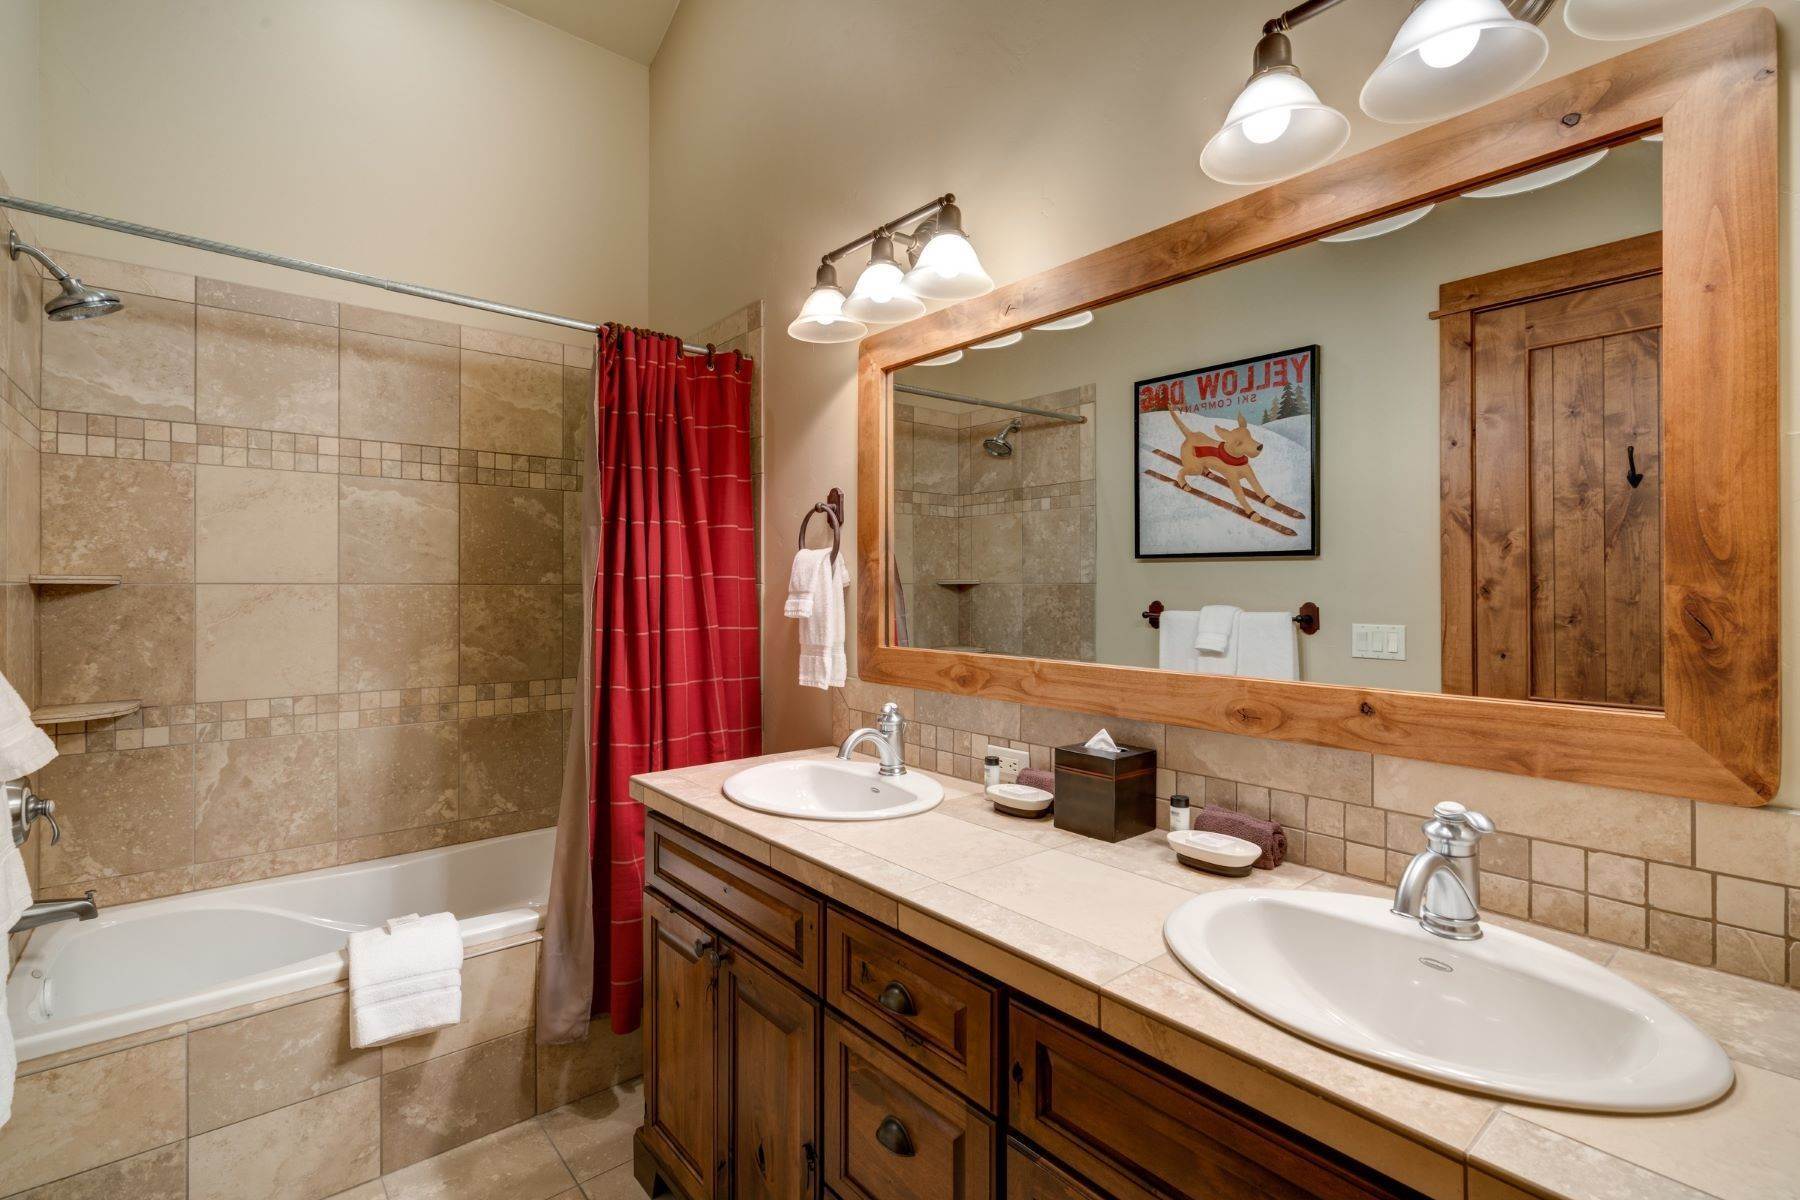 14. Fractional Ownership Property for Sale at 1331 Turning Leaf Court, Steamboat Springs, CO, 80487 1331 Turning Leaf Court Steamboat Springs, Colorado 80487 United States